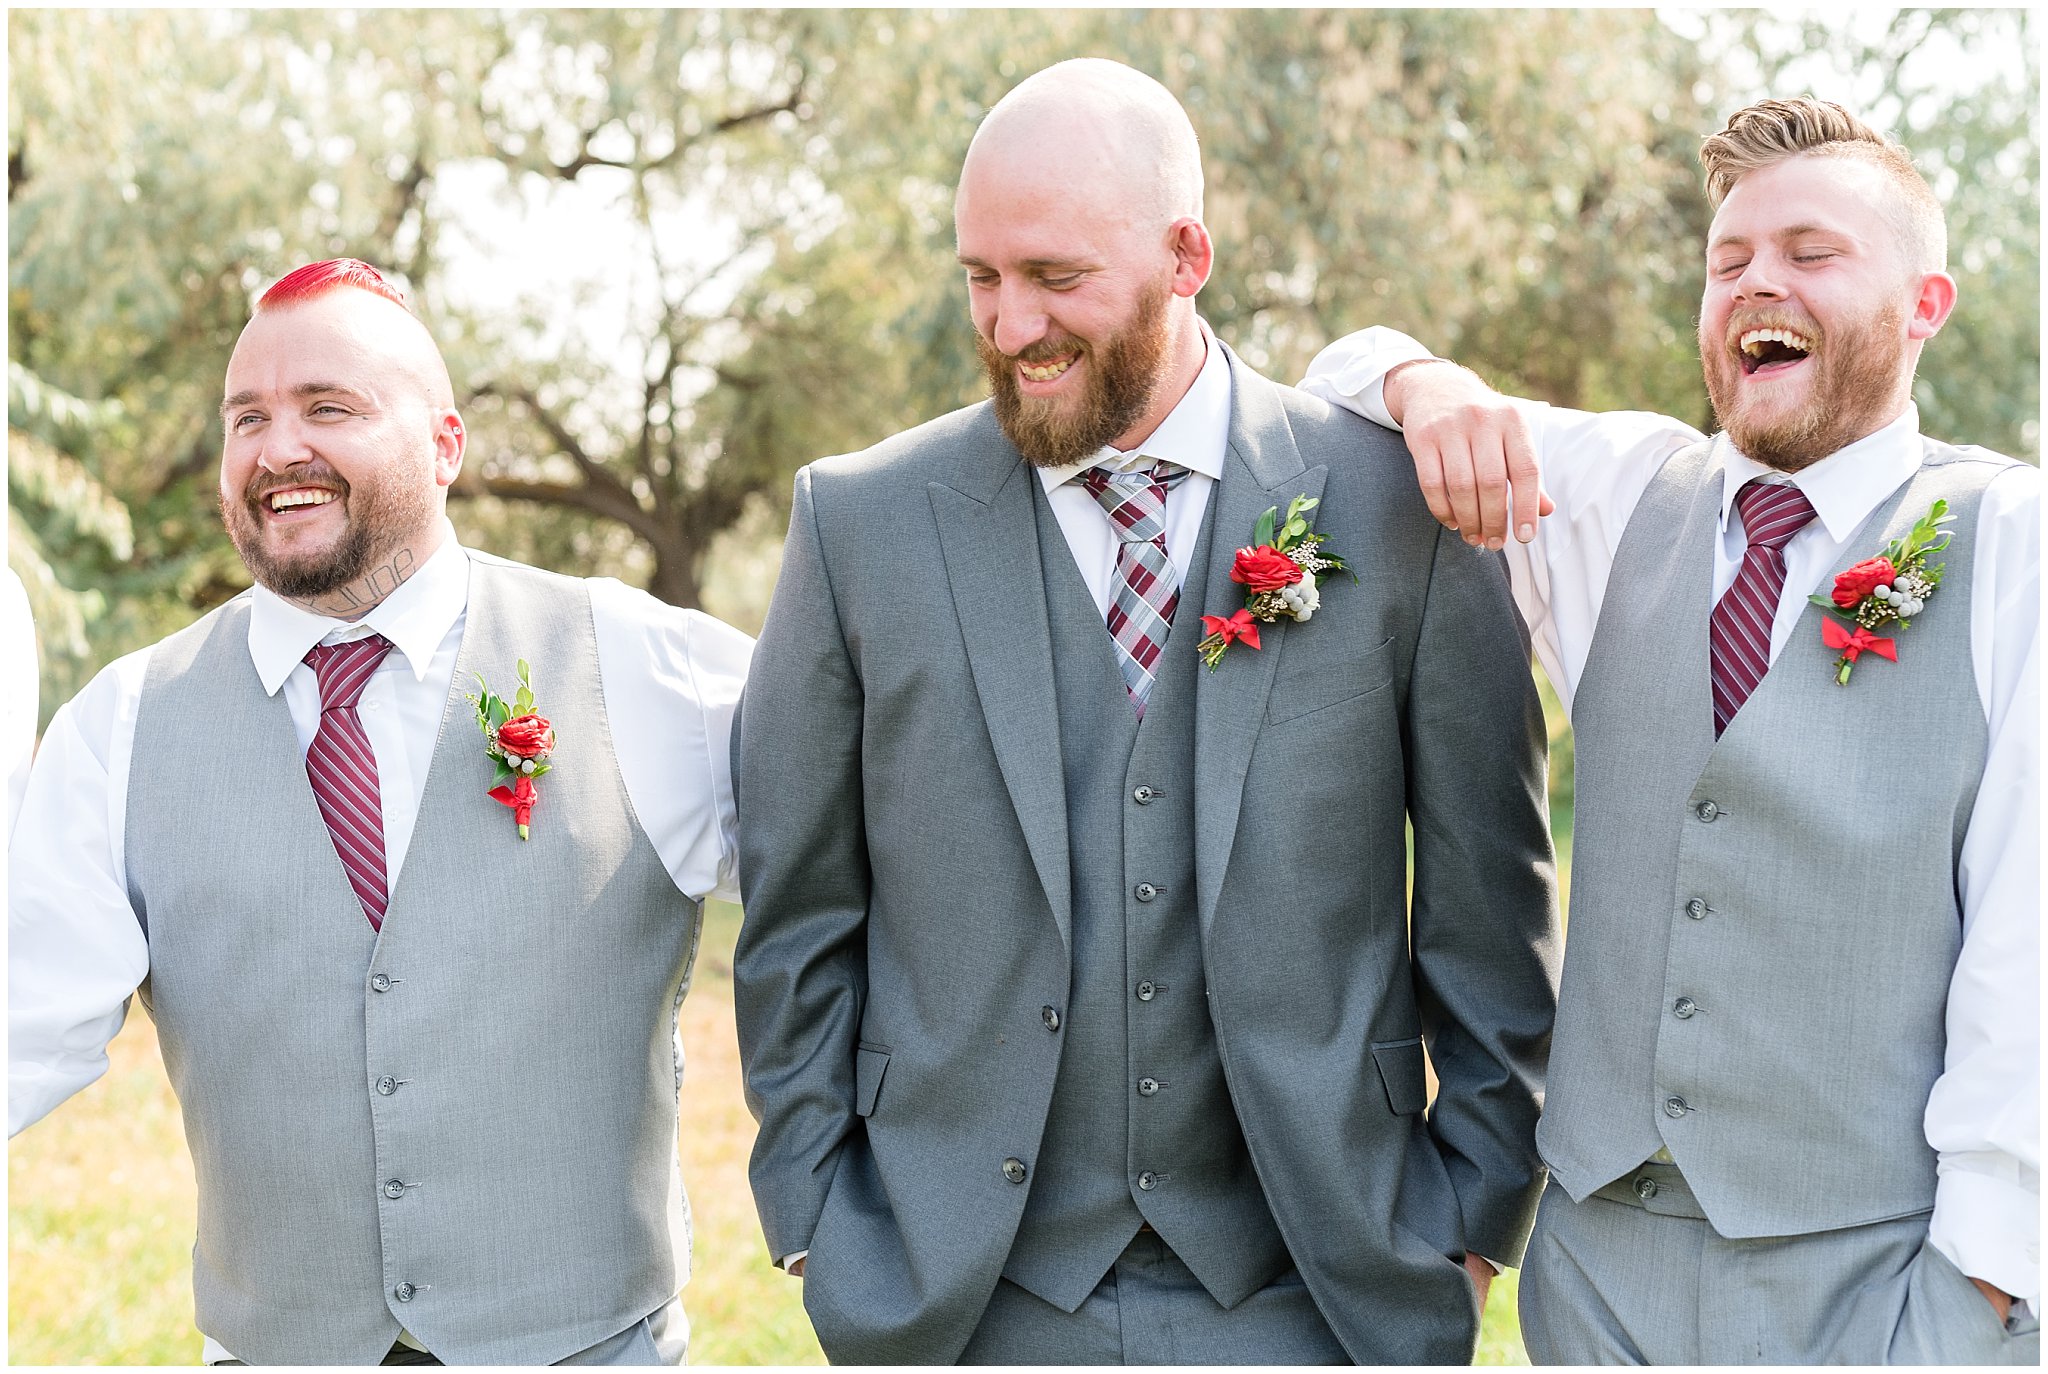 Groom and groomsmen in grey suits laughing candidly and walking | Davis County Outdoor Wedding | Jessie and Dallin Photography